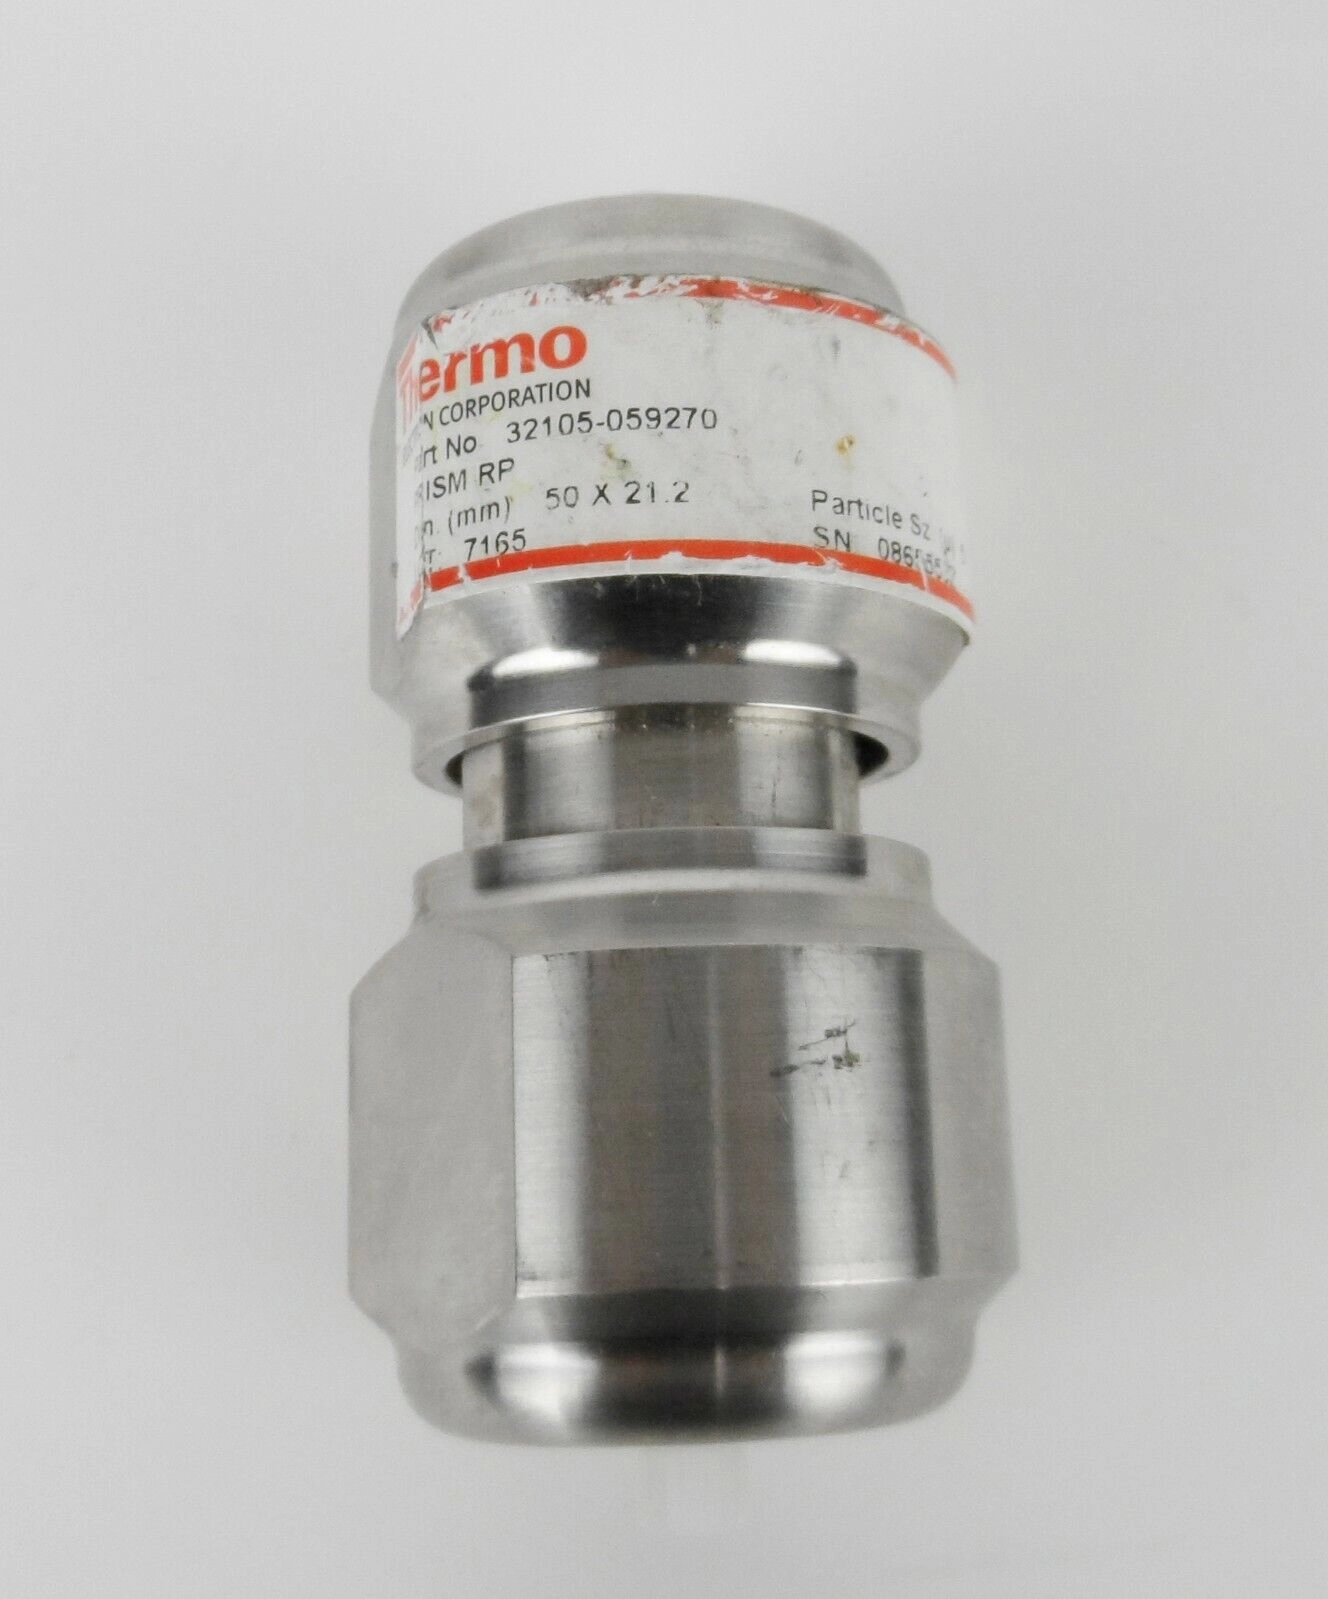 Thermo Prism RP 32105-059270 Column